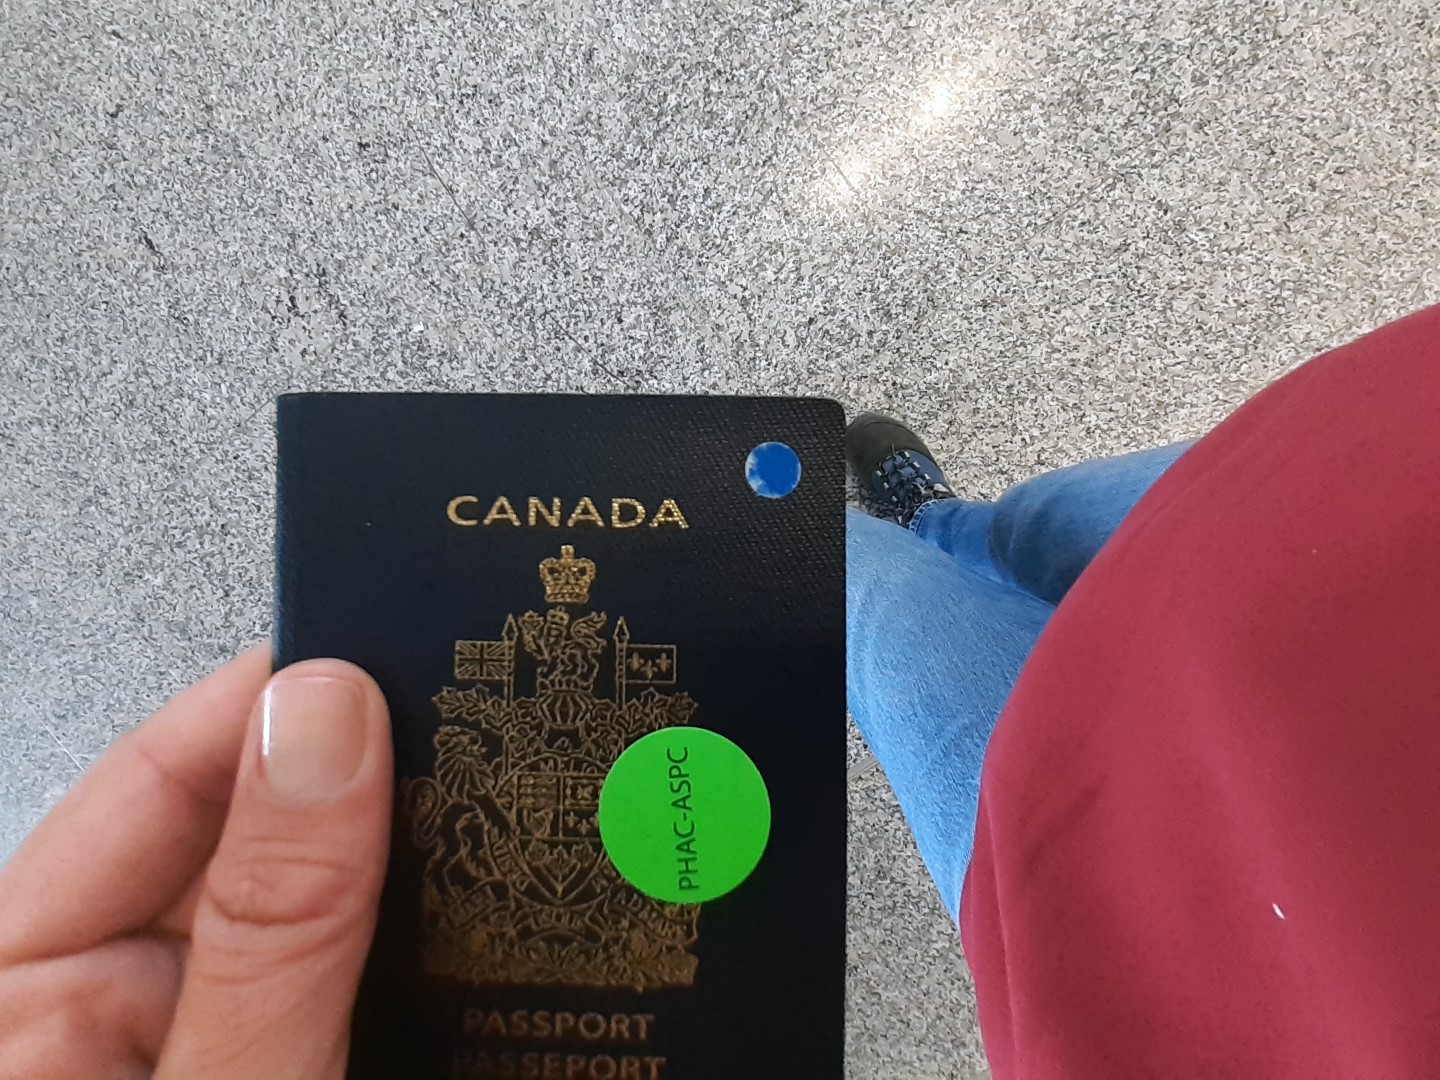 No COVID test for me, Toronto Pearson International Airport